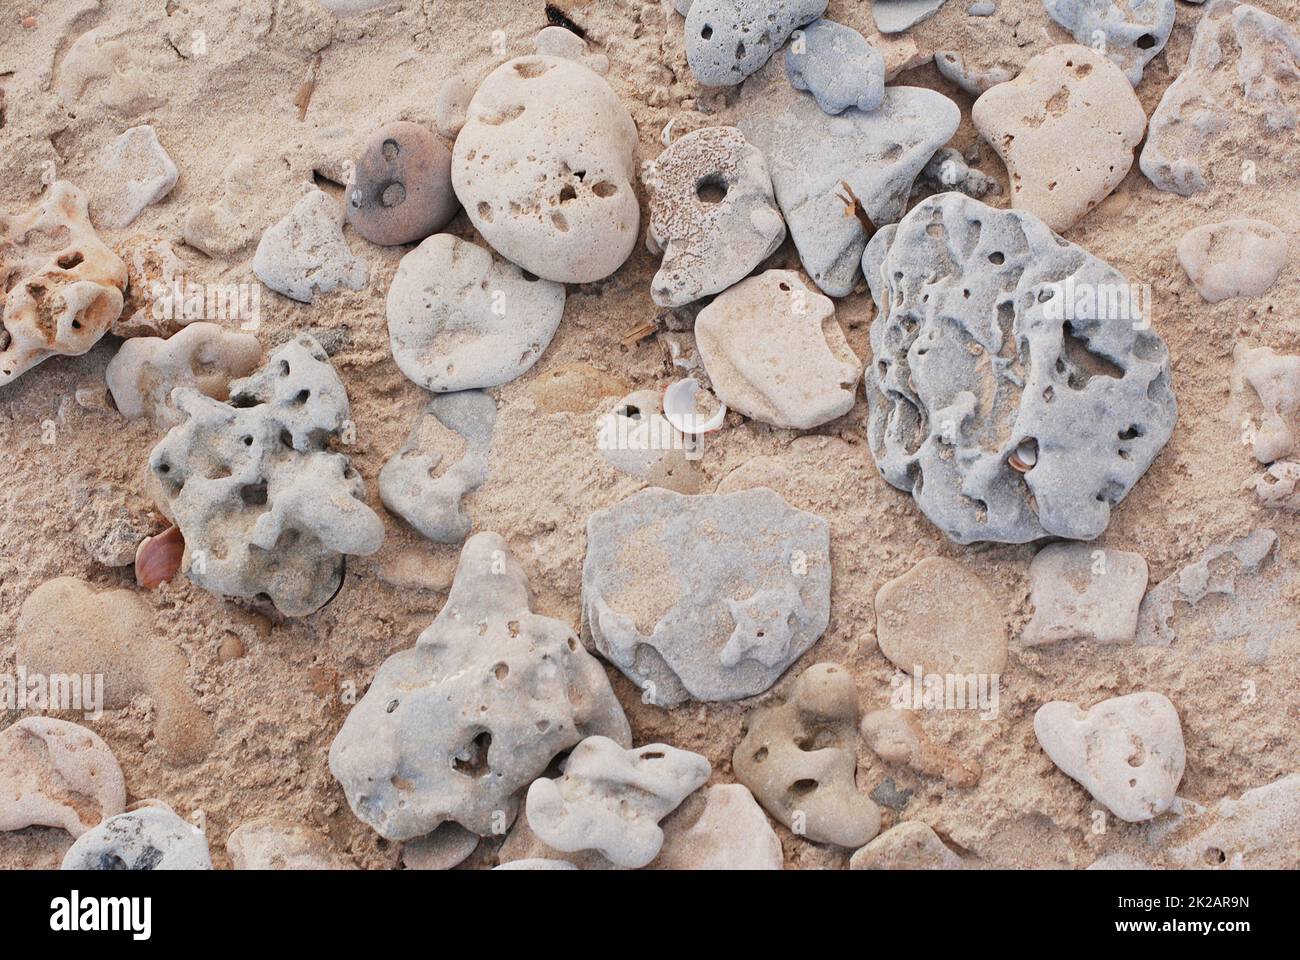 Stones with holes on a beach in Israel, mediterrean sea costline, rocks background, erosion geology Stock Photo